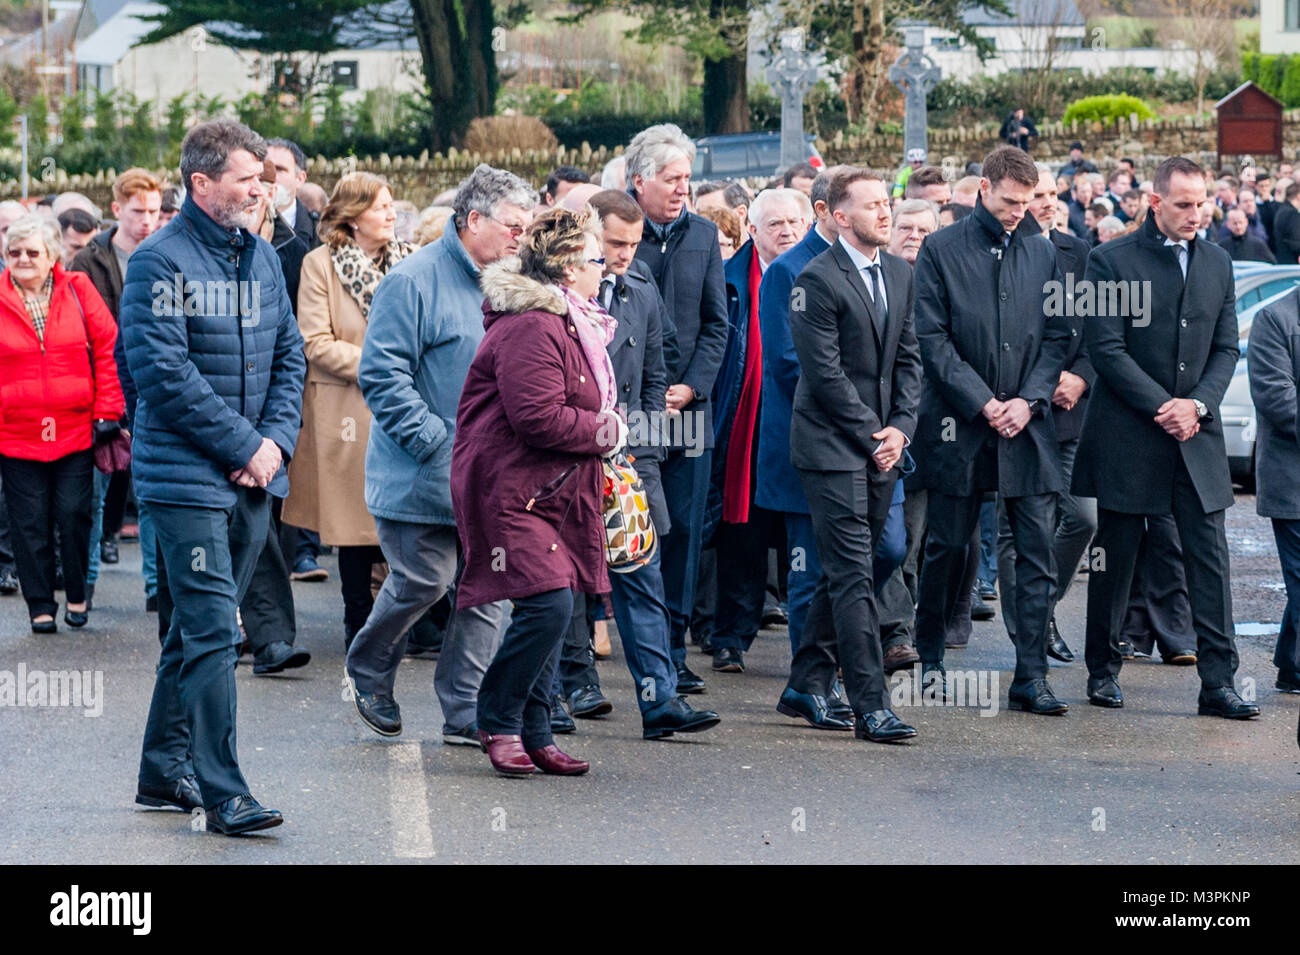 Ovens, Ireland. 12th Feb, 2018. The funeral of footballer Liam Miller took place today at St. John the Baptist Church, Ovens, County Cork, Ireland. A huge number of mourners attended the funeral, including many footballers from Miller's old clubs, including Cork City, Celtic and Manchester United. Roy Keane (nearest camera), Aiden McGeady, Shaun Maloney and FA Ireland boss John Delaney were amongst the mourners. Credit: Andy Gibson/Alamy Live News. Stock Photo